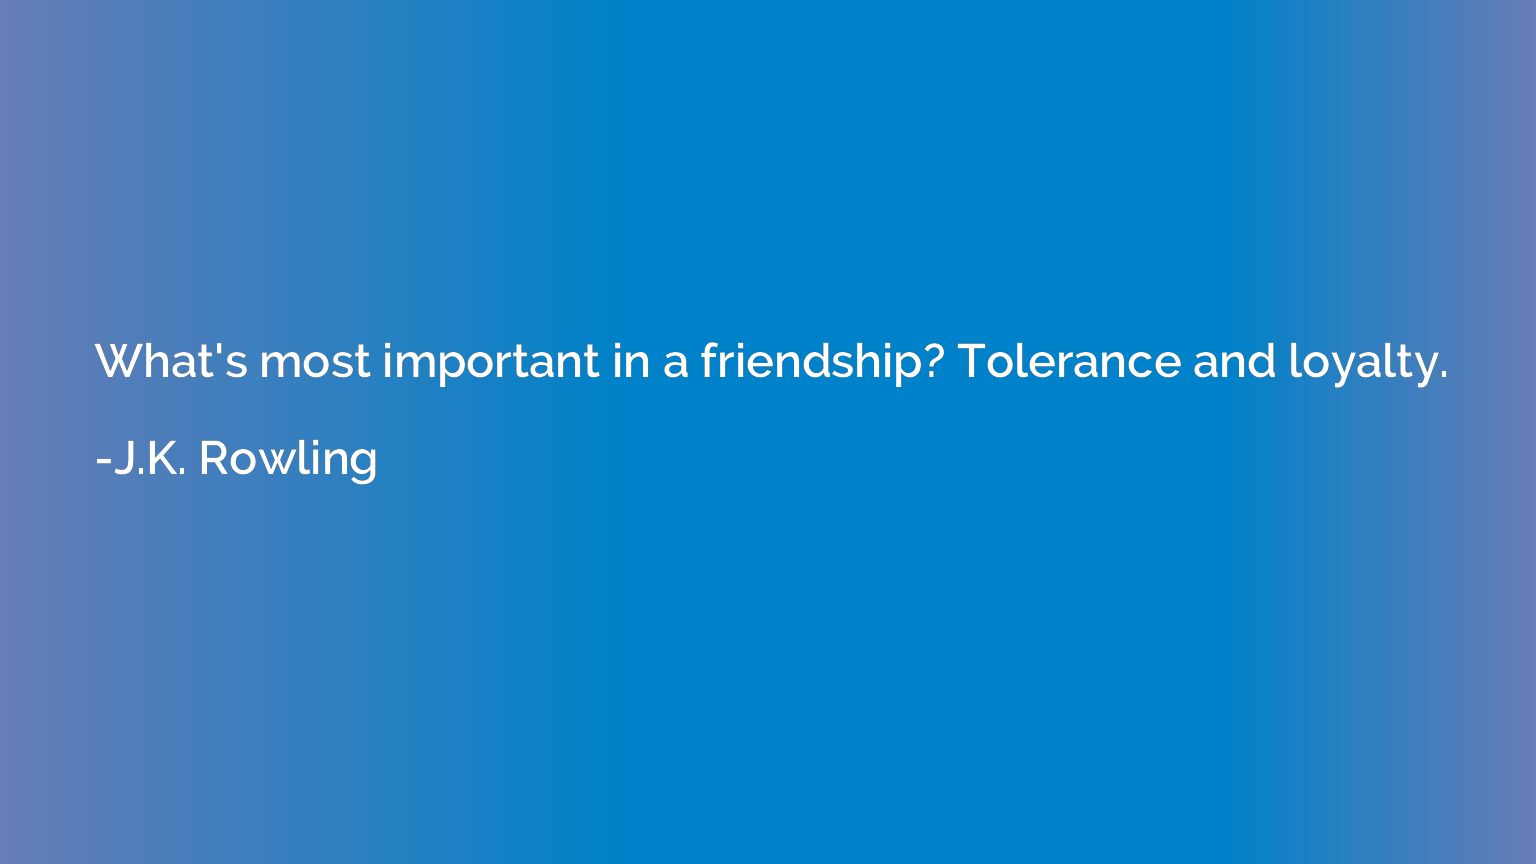 What's most important in a friendship? Tolerance and loyalty